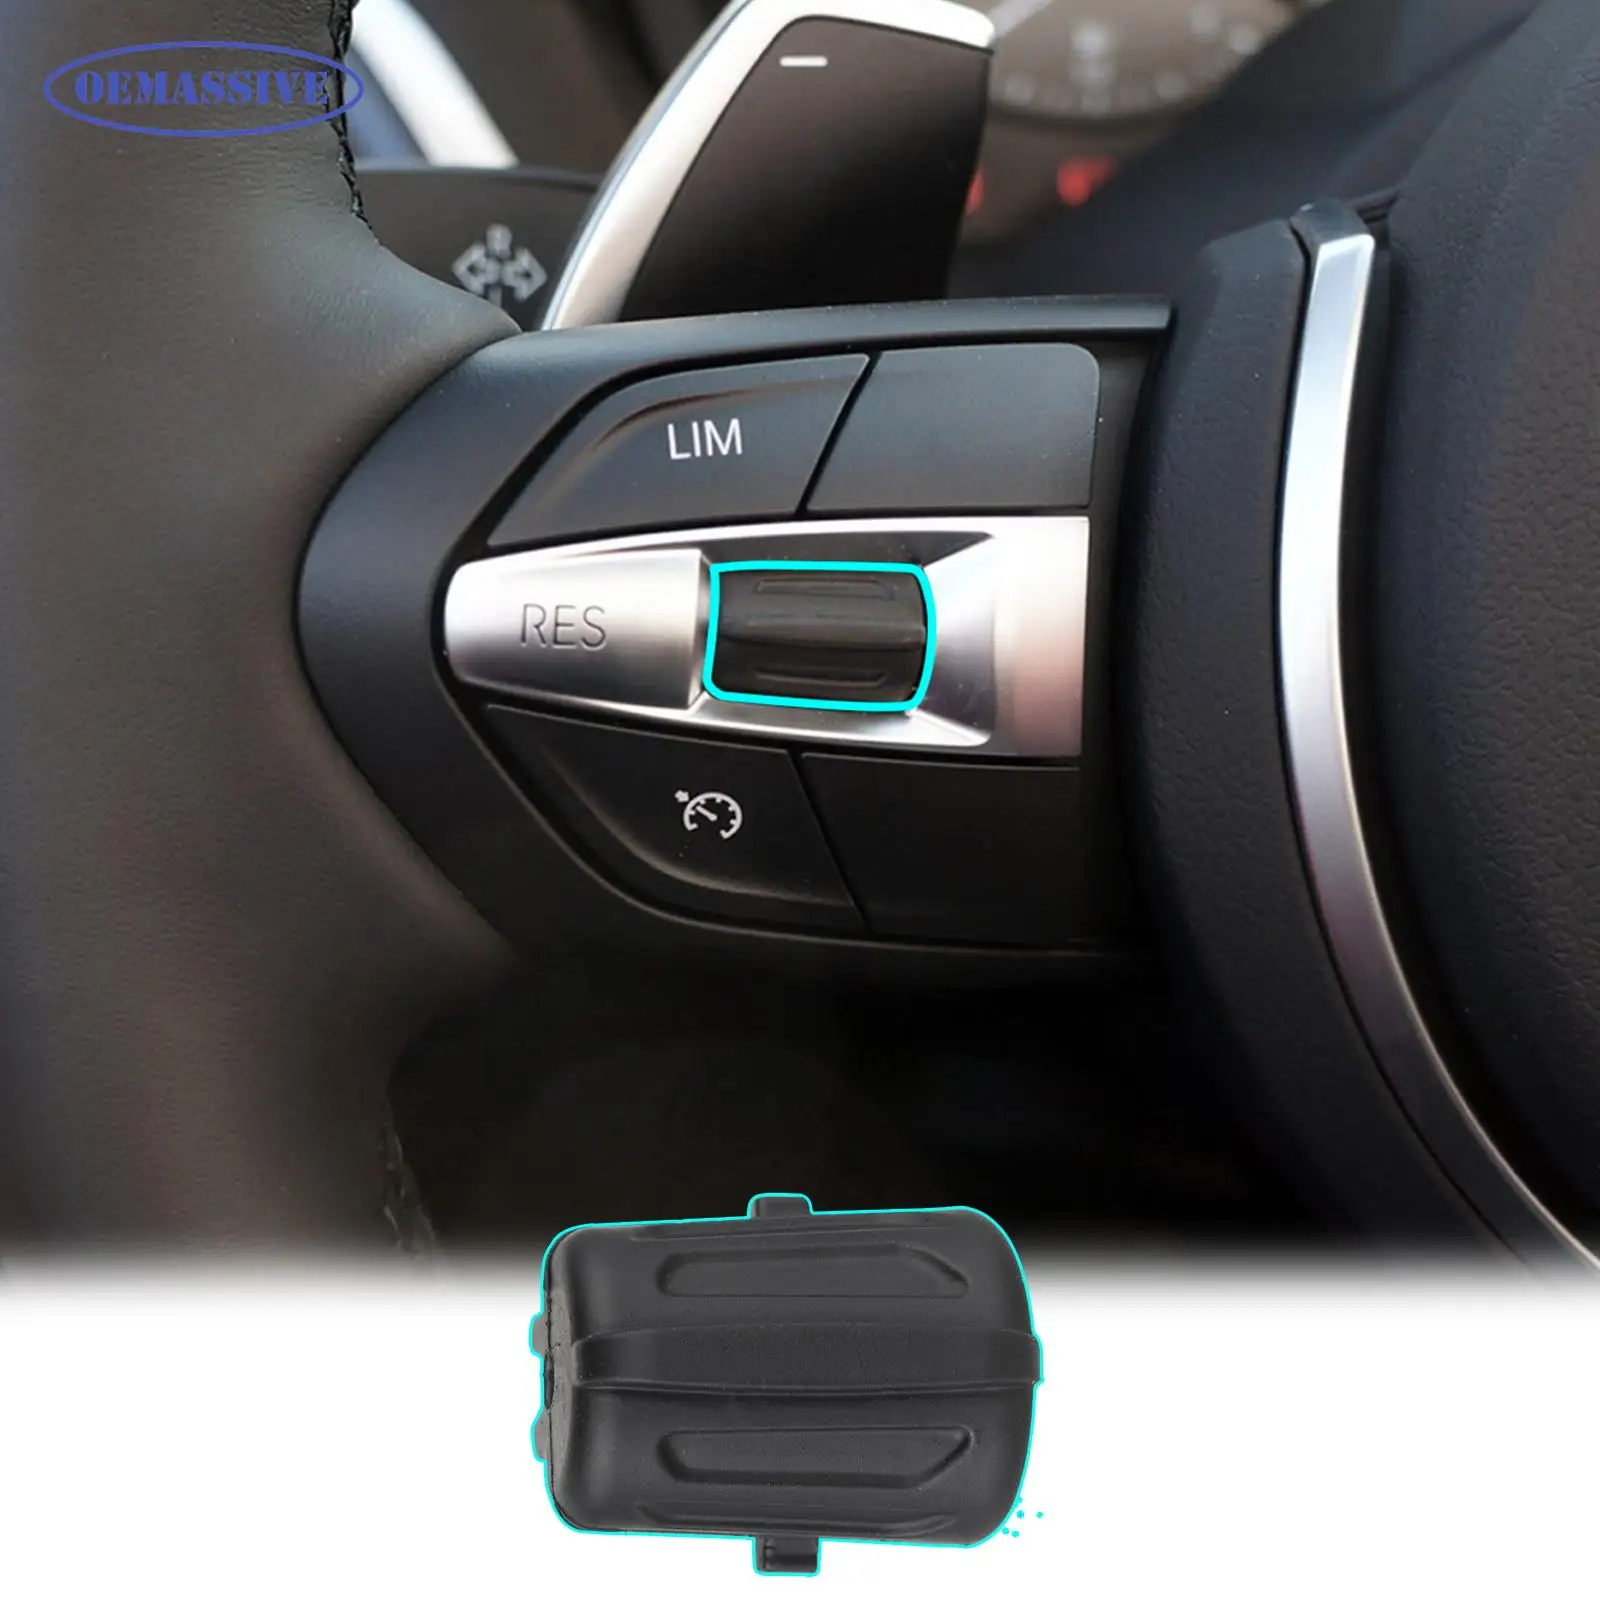 

M Sport Left Car Multi-function Steering Wheel Cruise Button Switch For BMW 1 3 4 5 6 7 Series F20 F21 F22 F23 F30 F31 F32 M3 M6